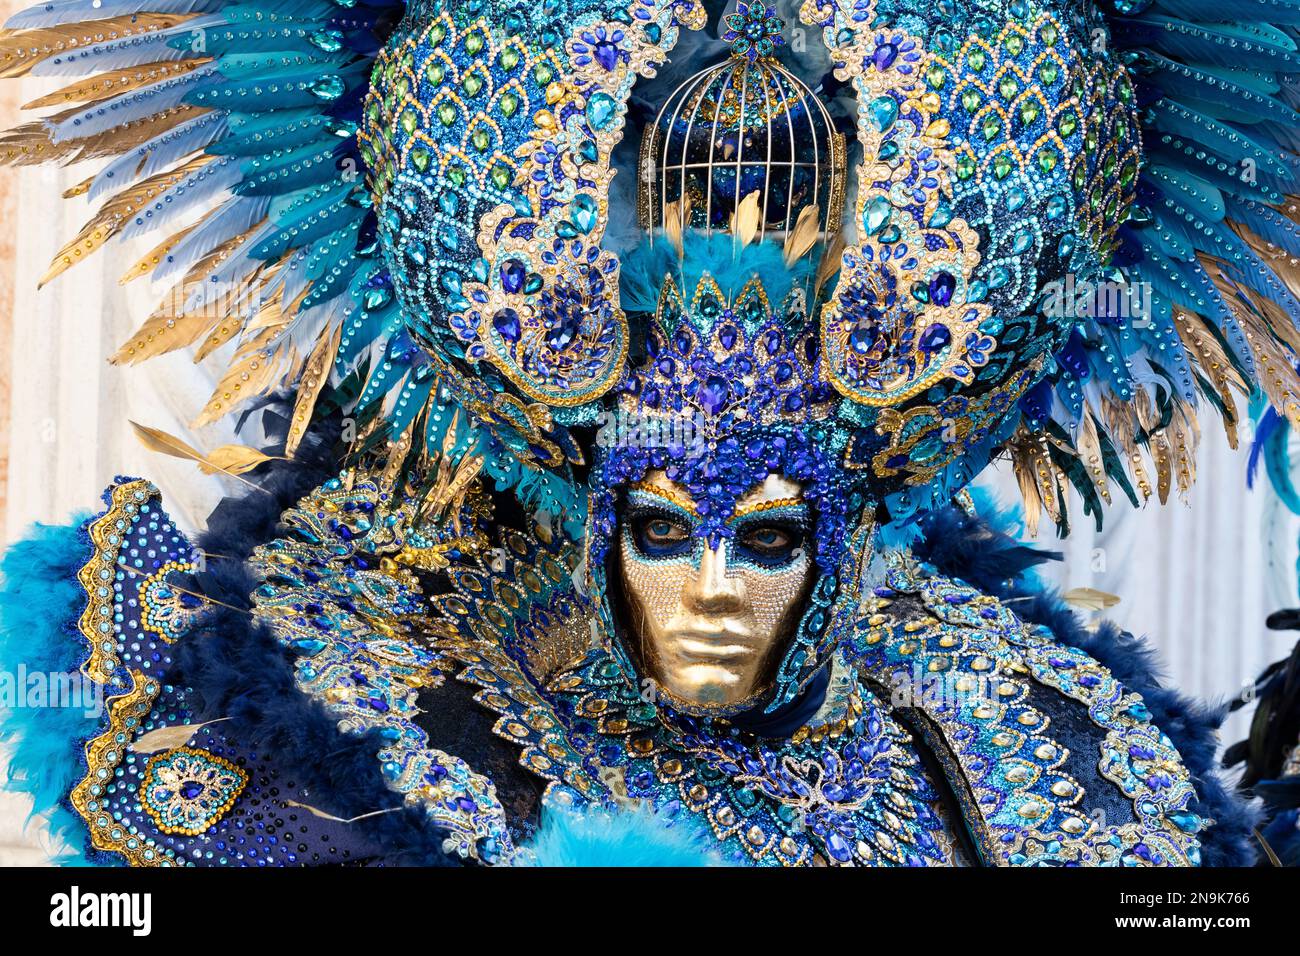 Venice, Italy. 12. February 2023. Venice, Italy. Revellers wear colourful  blue costumes for the annual Carnevale di Venezia, Carnival in Venice.  Credit: Vibrant Pictures/Alamy Live News Stock Photo - Alamy